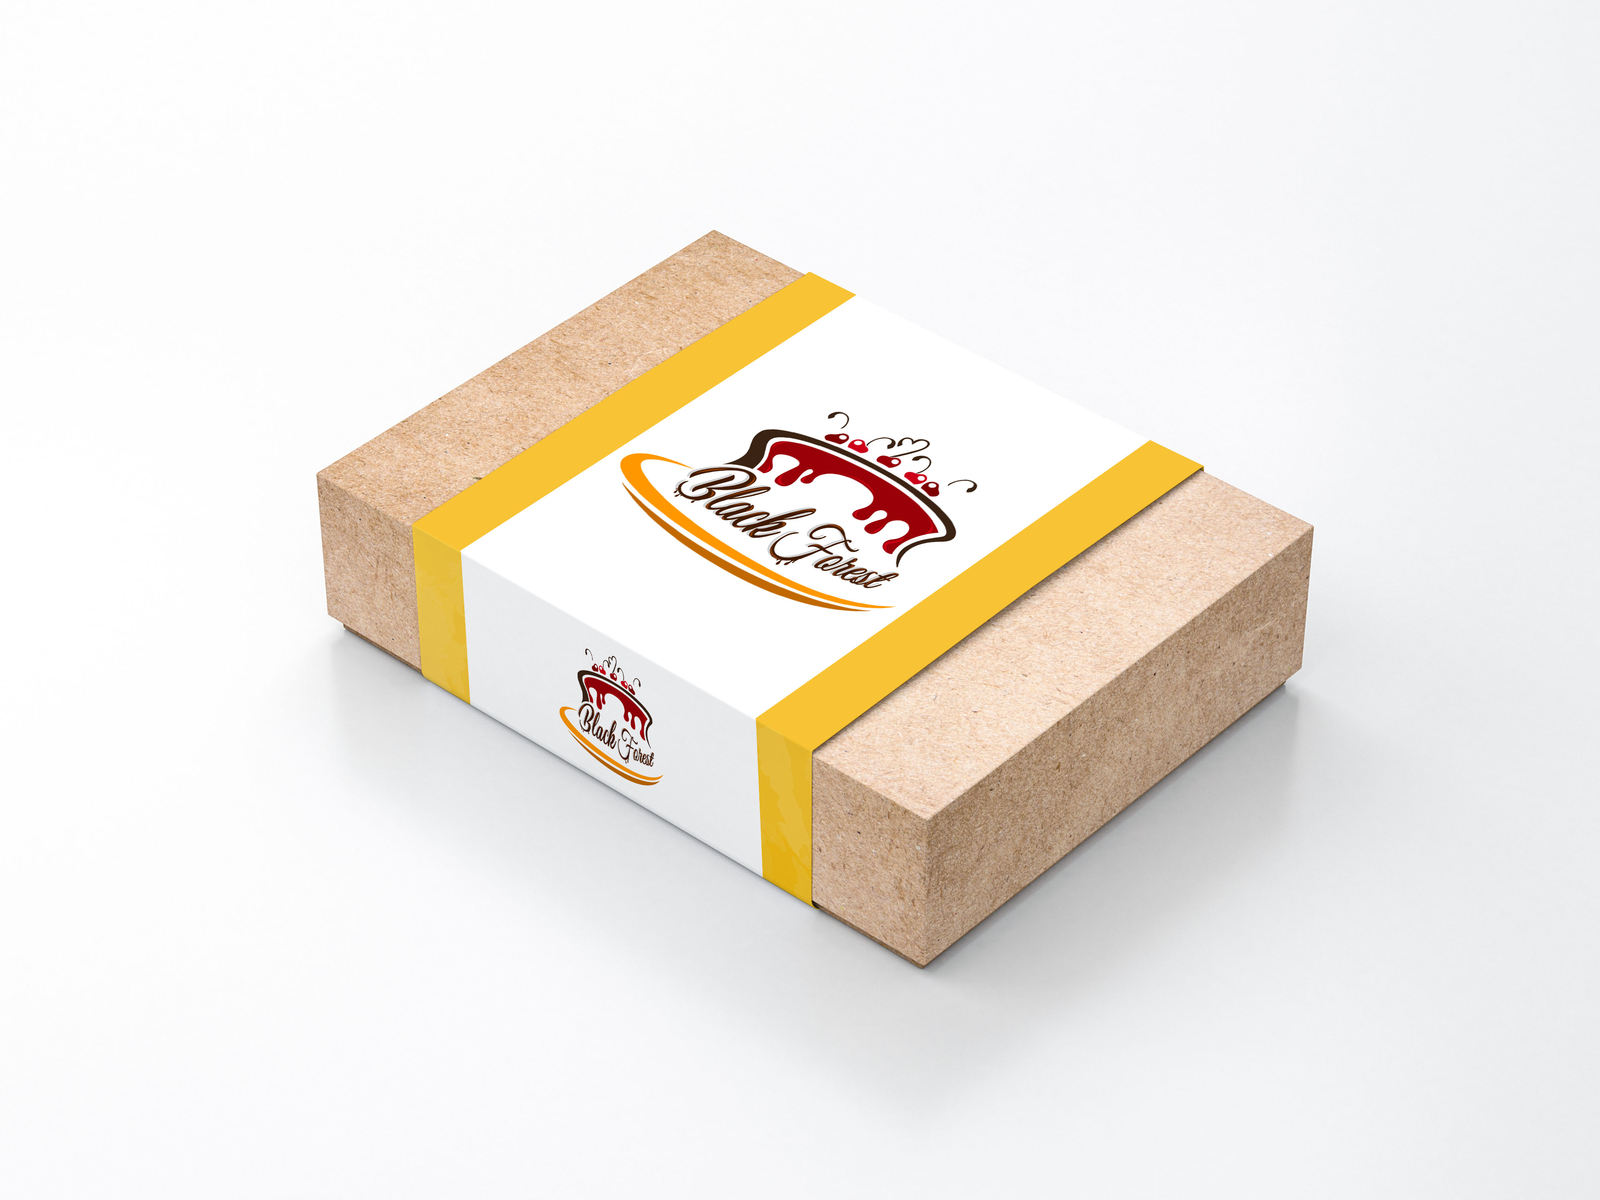 Download Cake Logo Design and Mockup by blessy paulraj on Dribbble